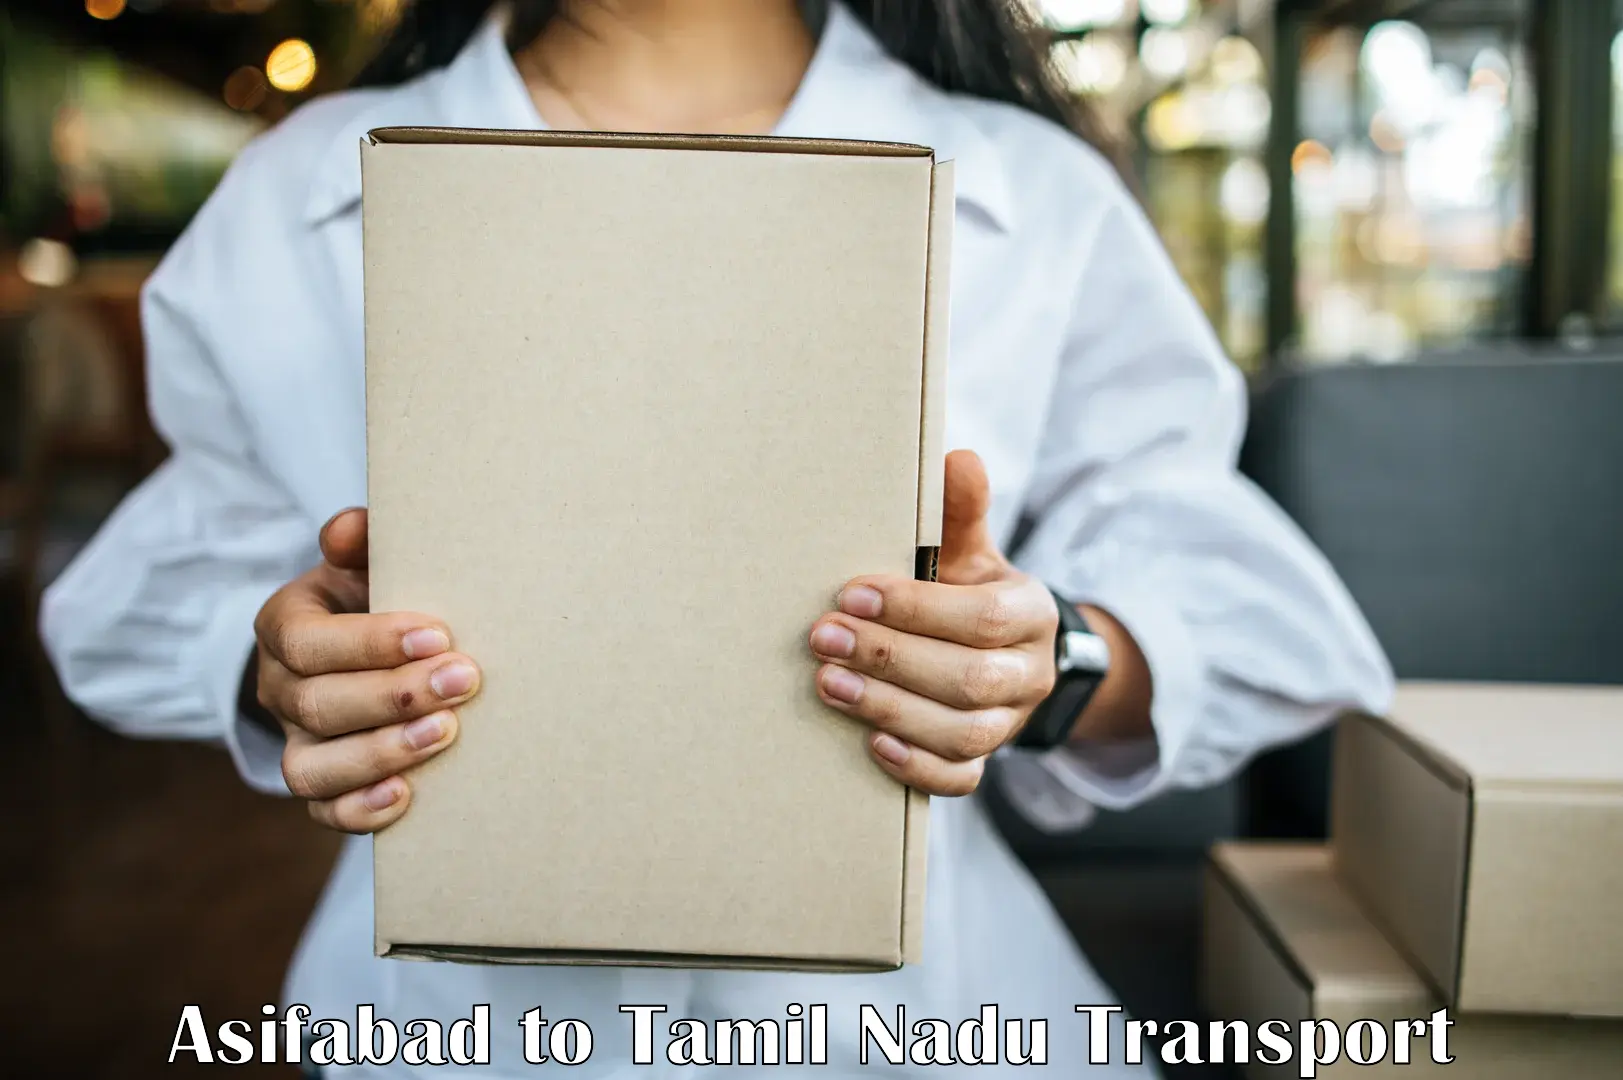 Online transport service Asifabad to Cuddalore